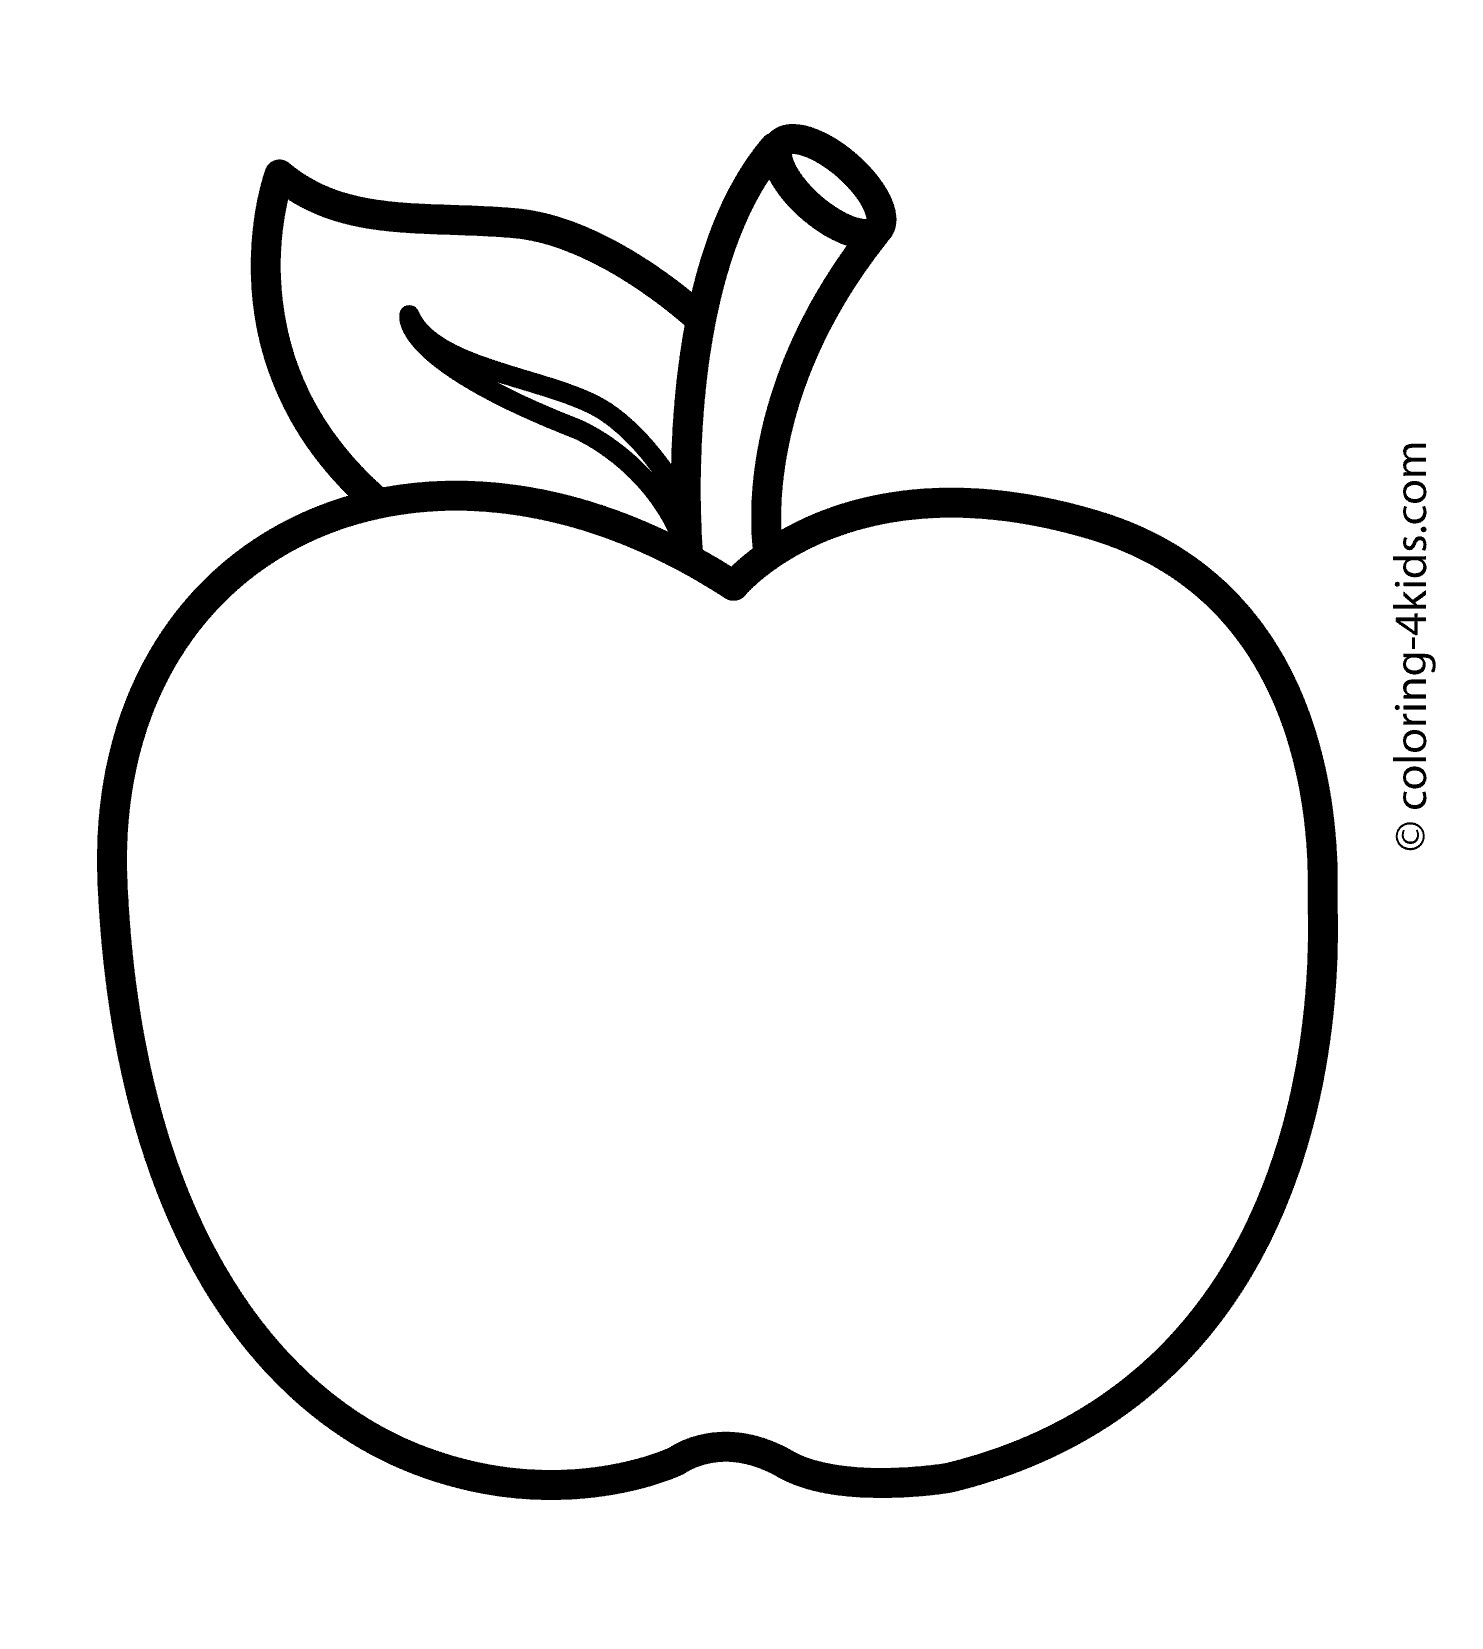 Apple Printable Coloring Pages
 Apple Fruits coloring pages nice for kids printable free